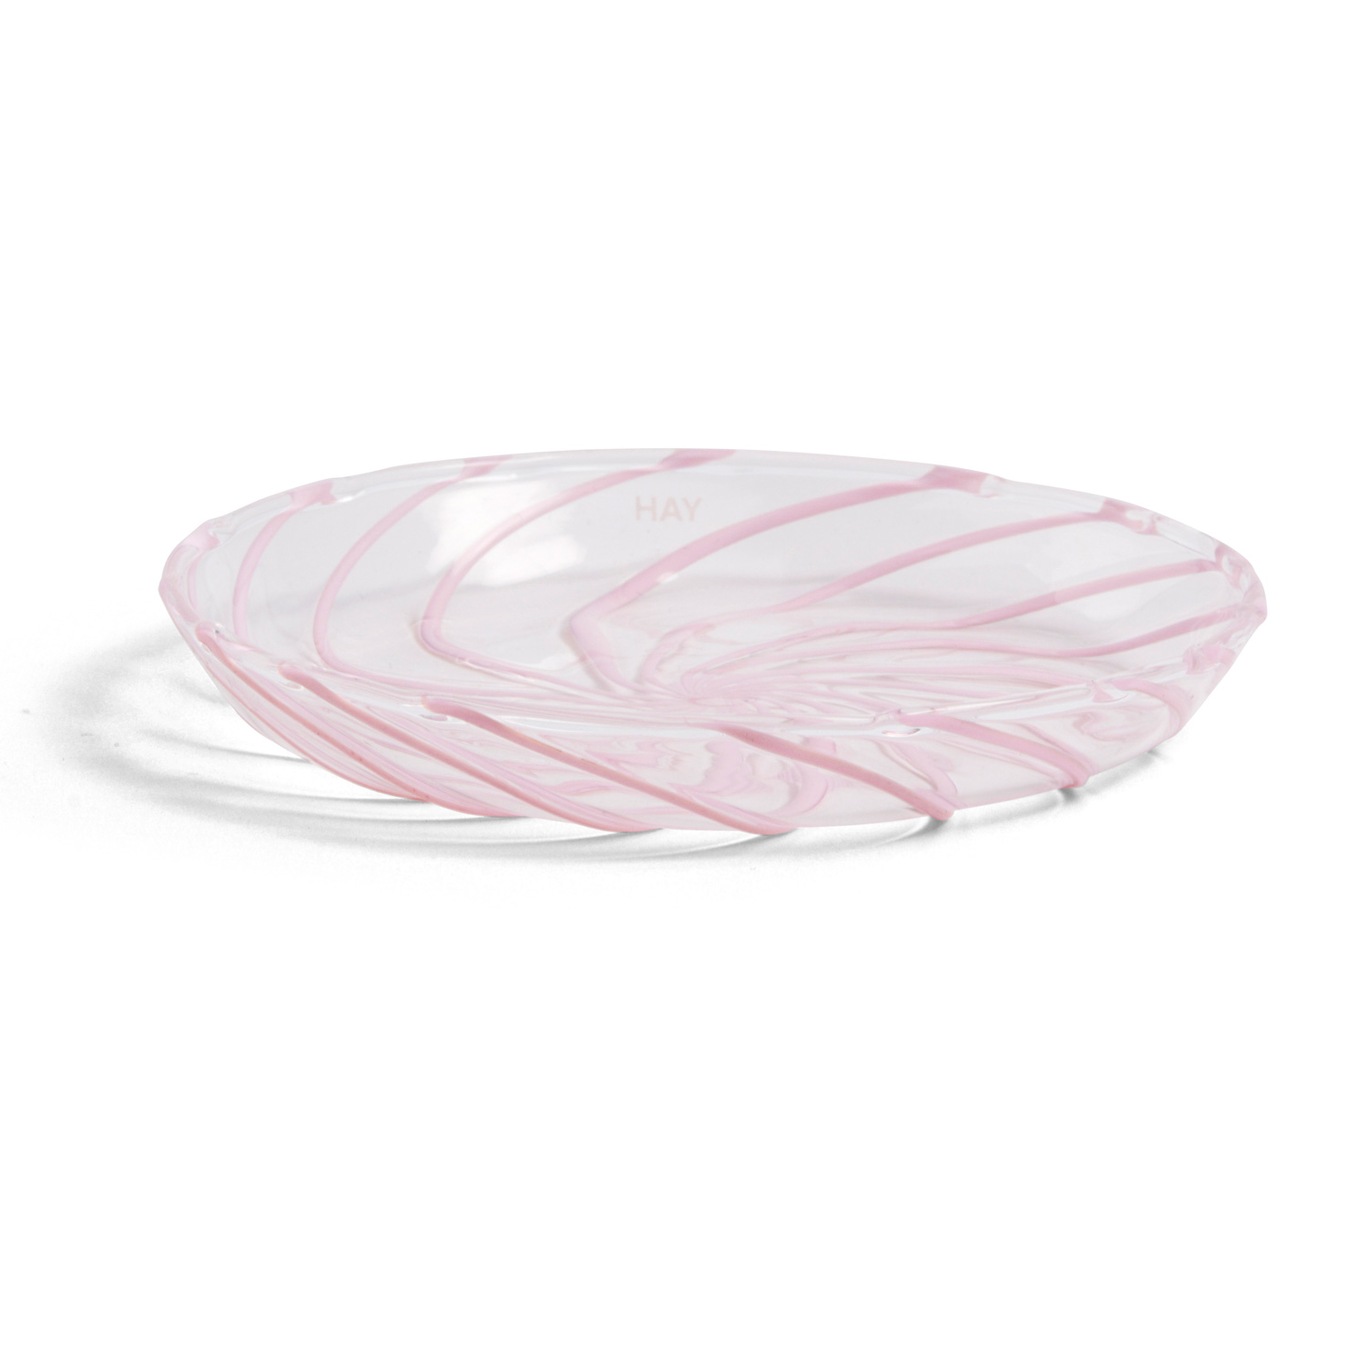 Spin Saucer 2-pack, Clear / Pink Stripe